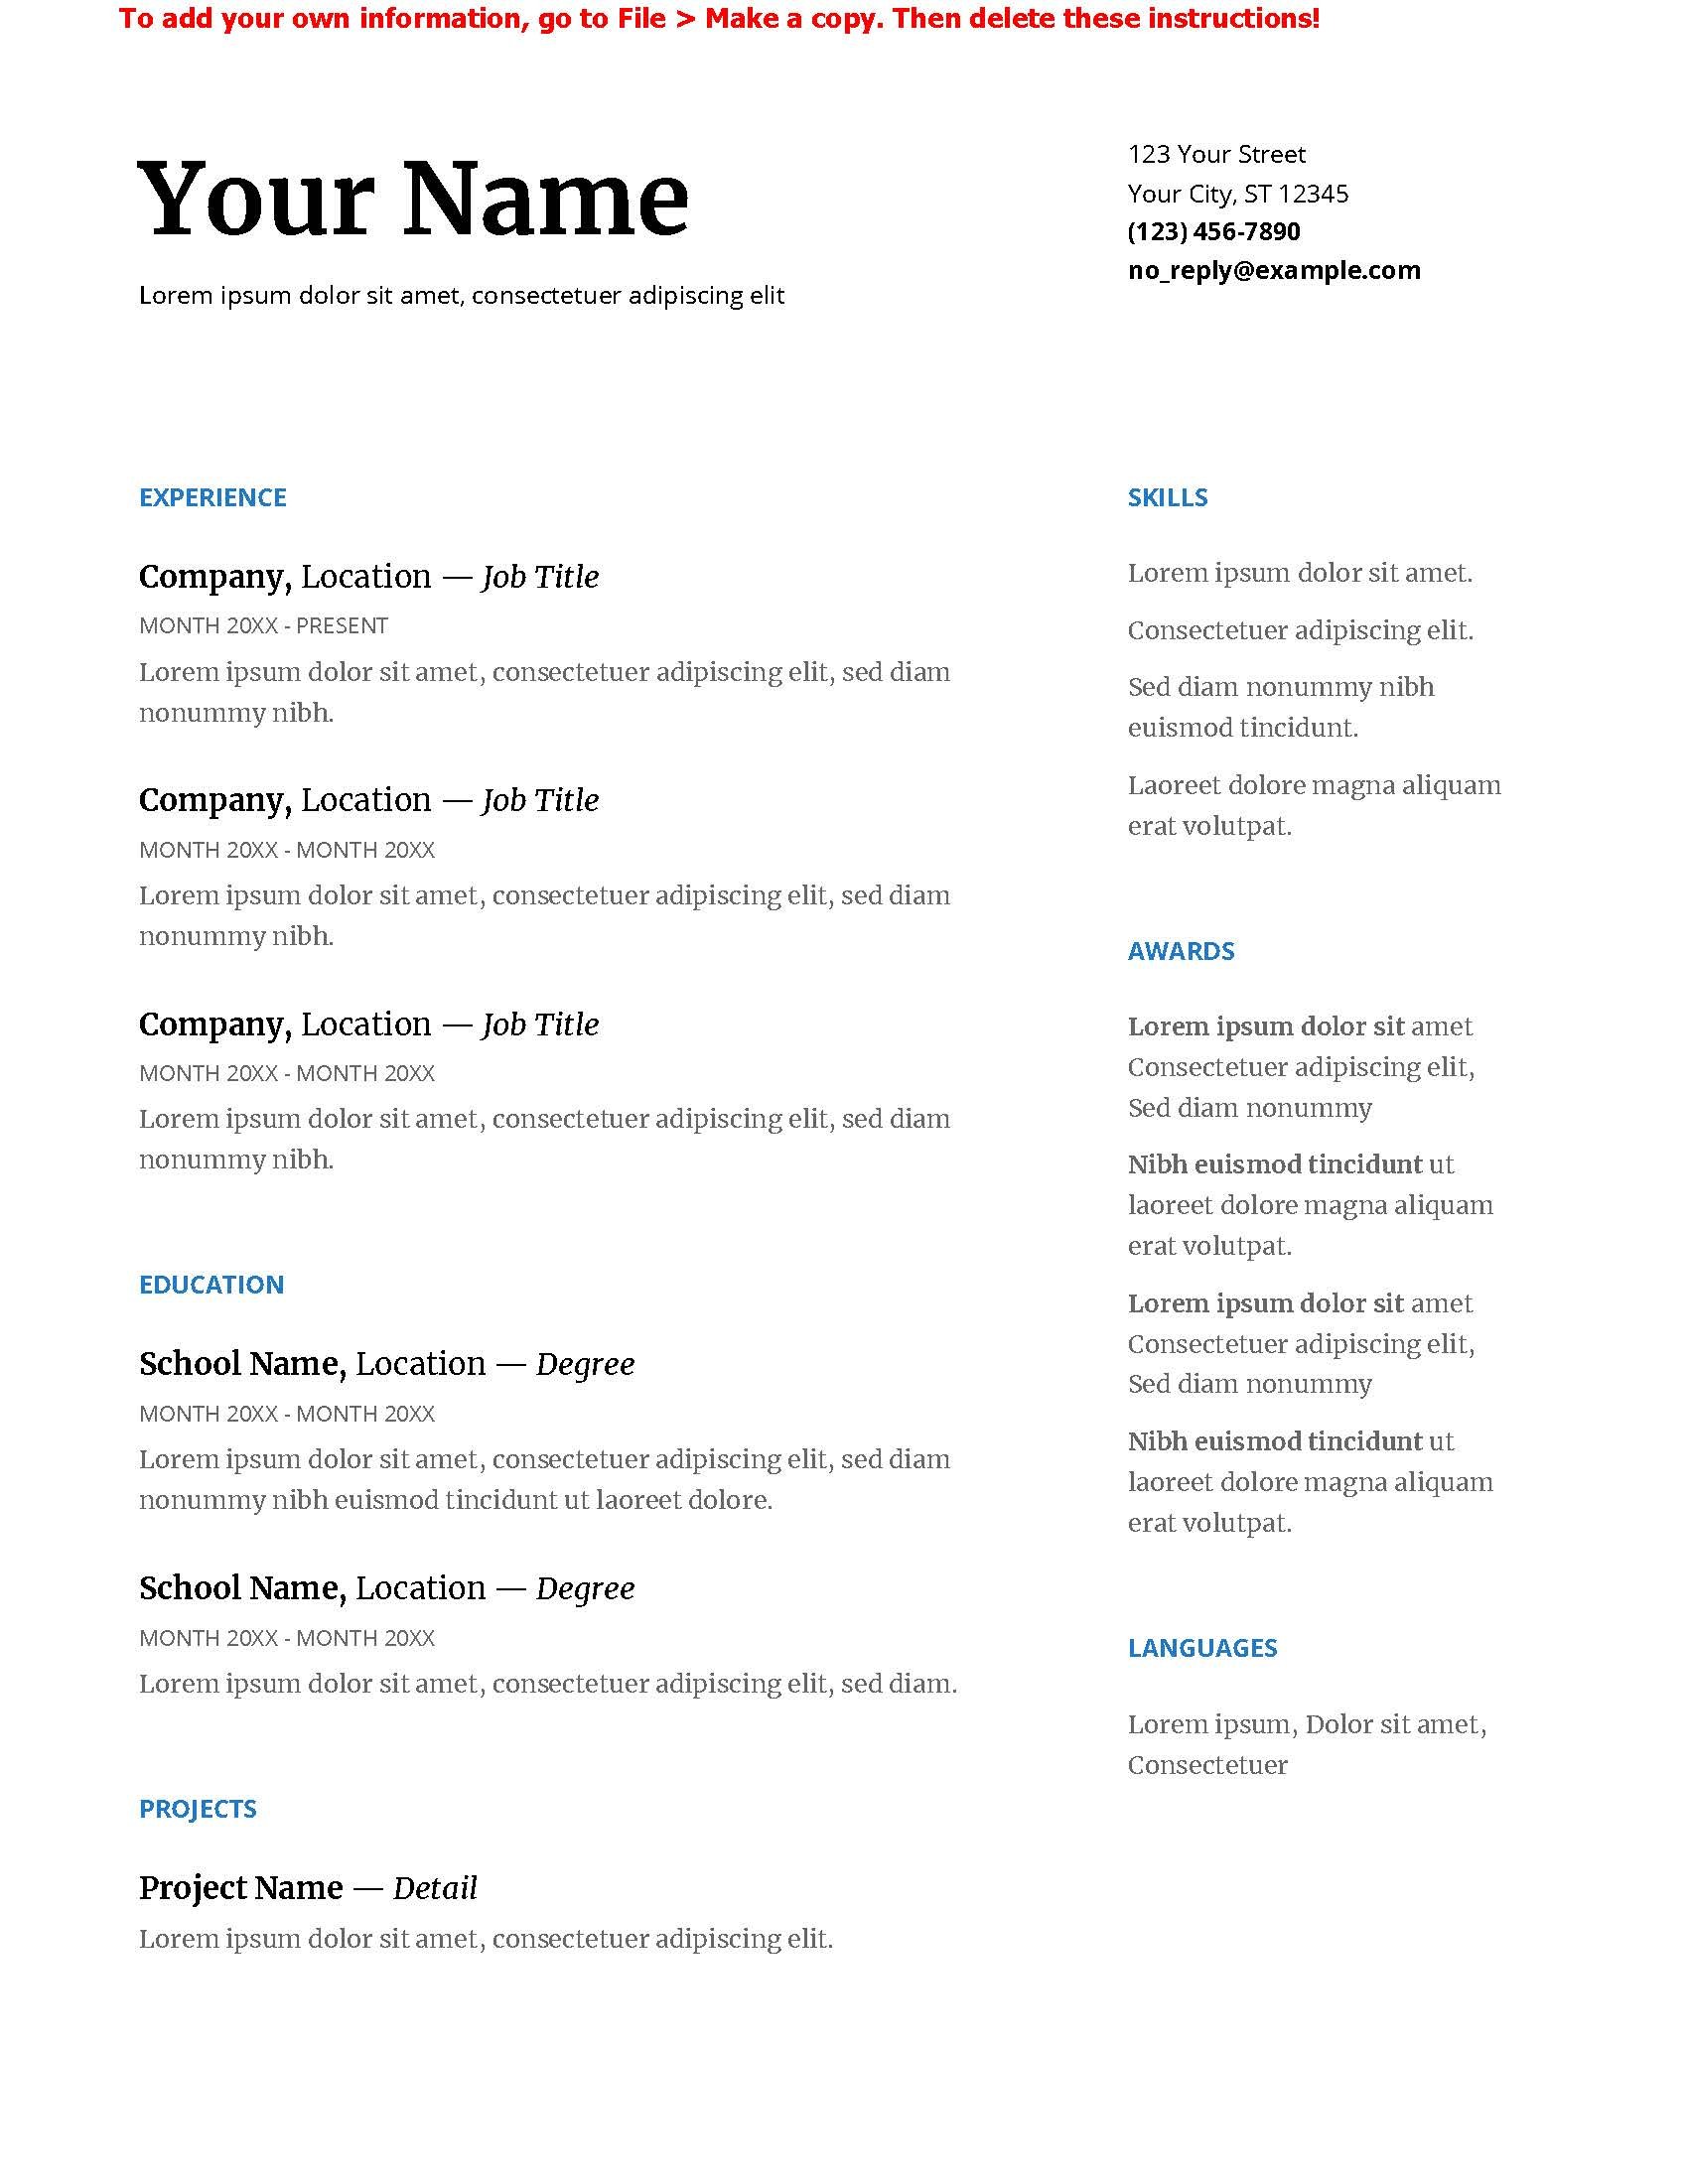 RESUME TEMPLATE A